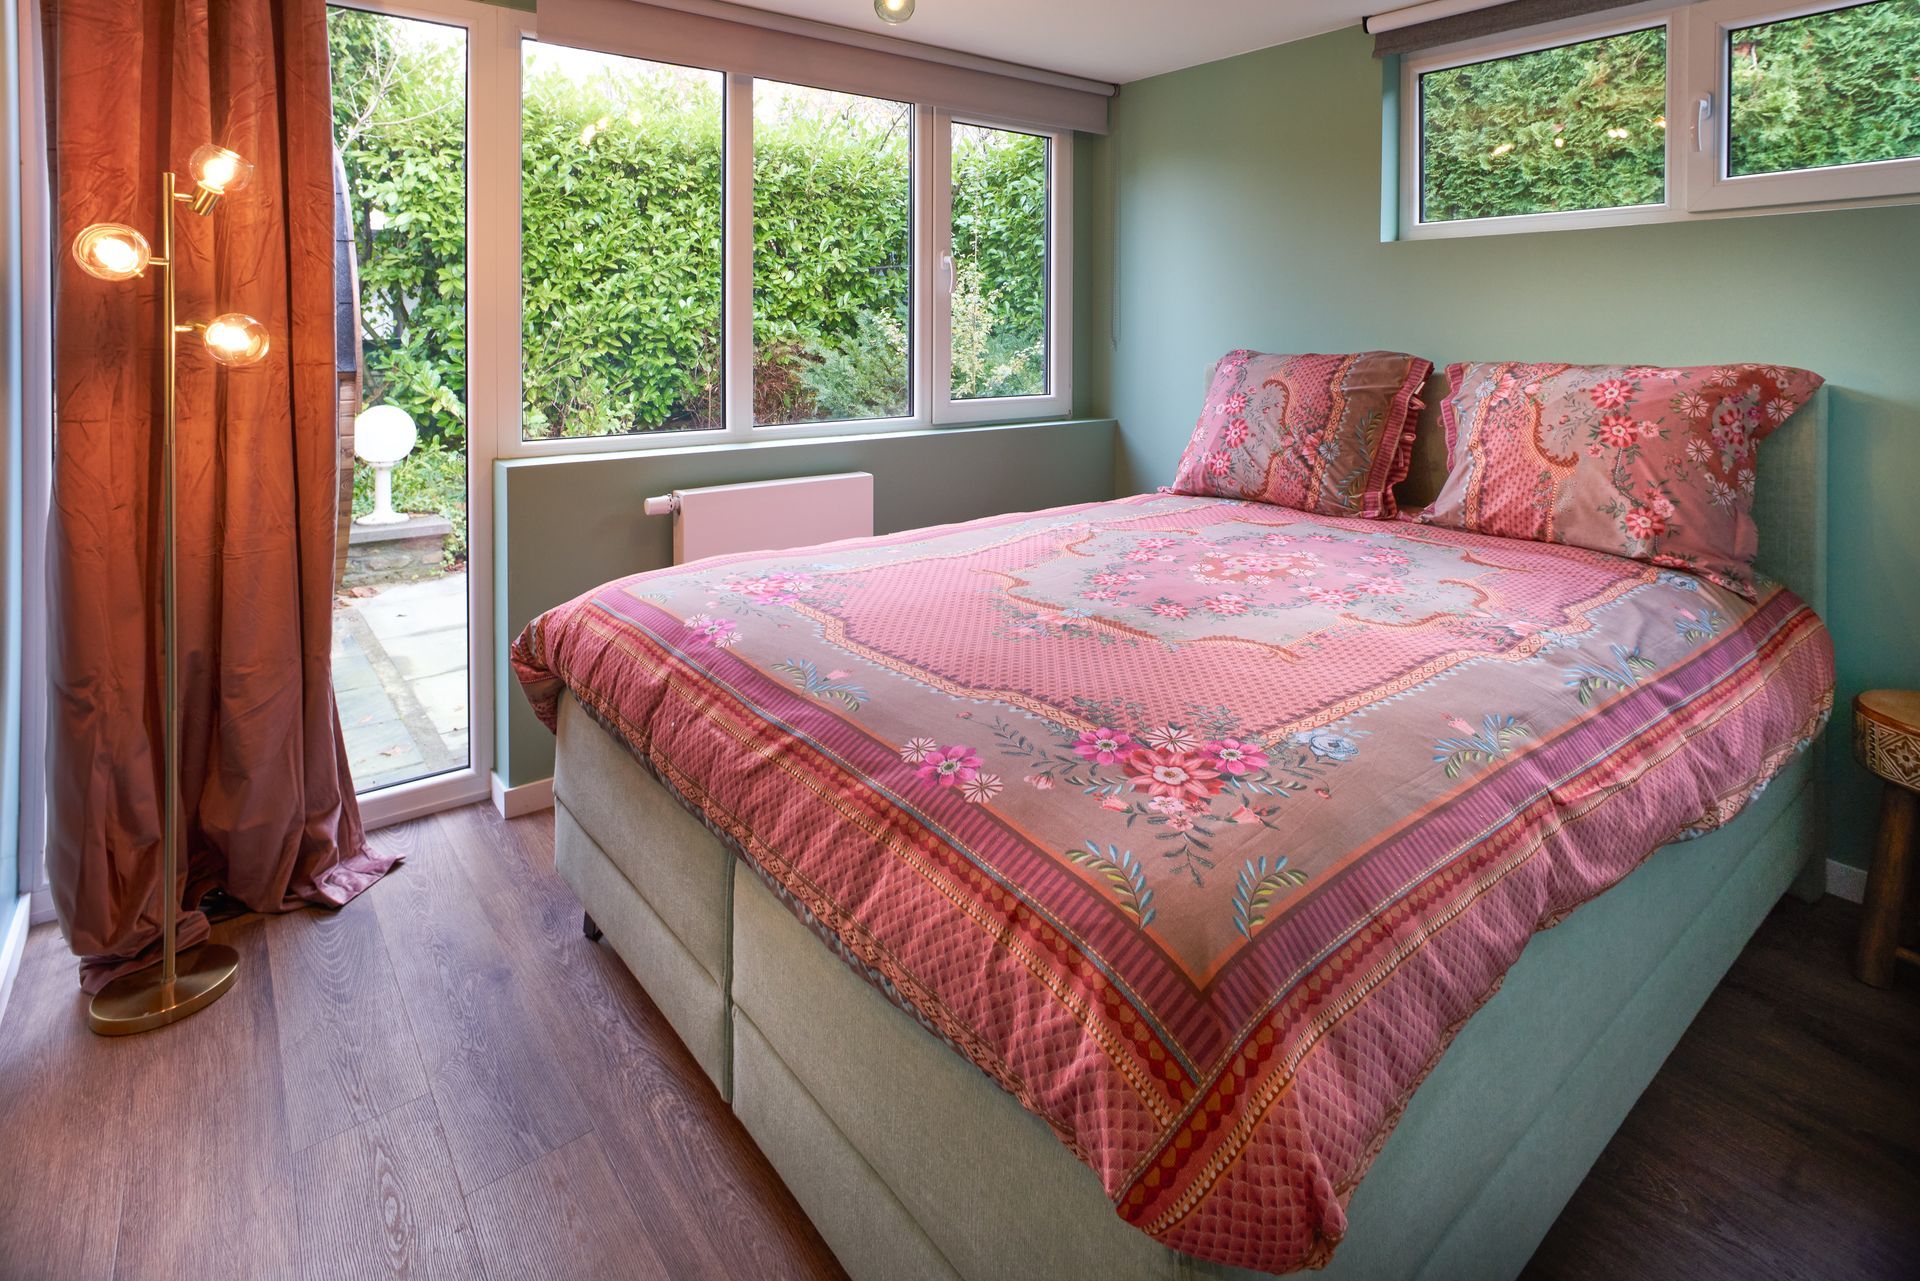 a bed with a pink floral comforter and pillows - Lacuna Vitta holiday home